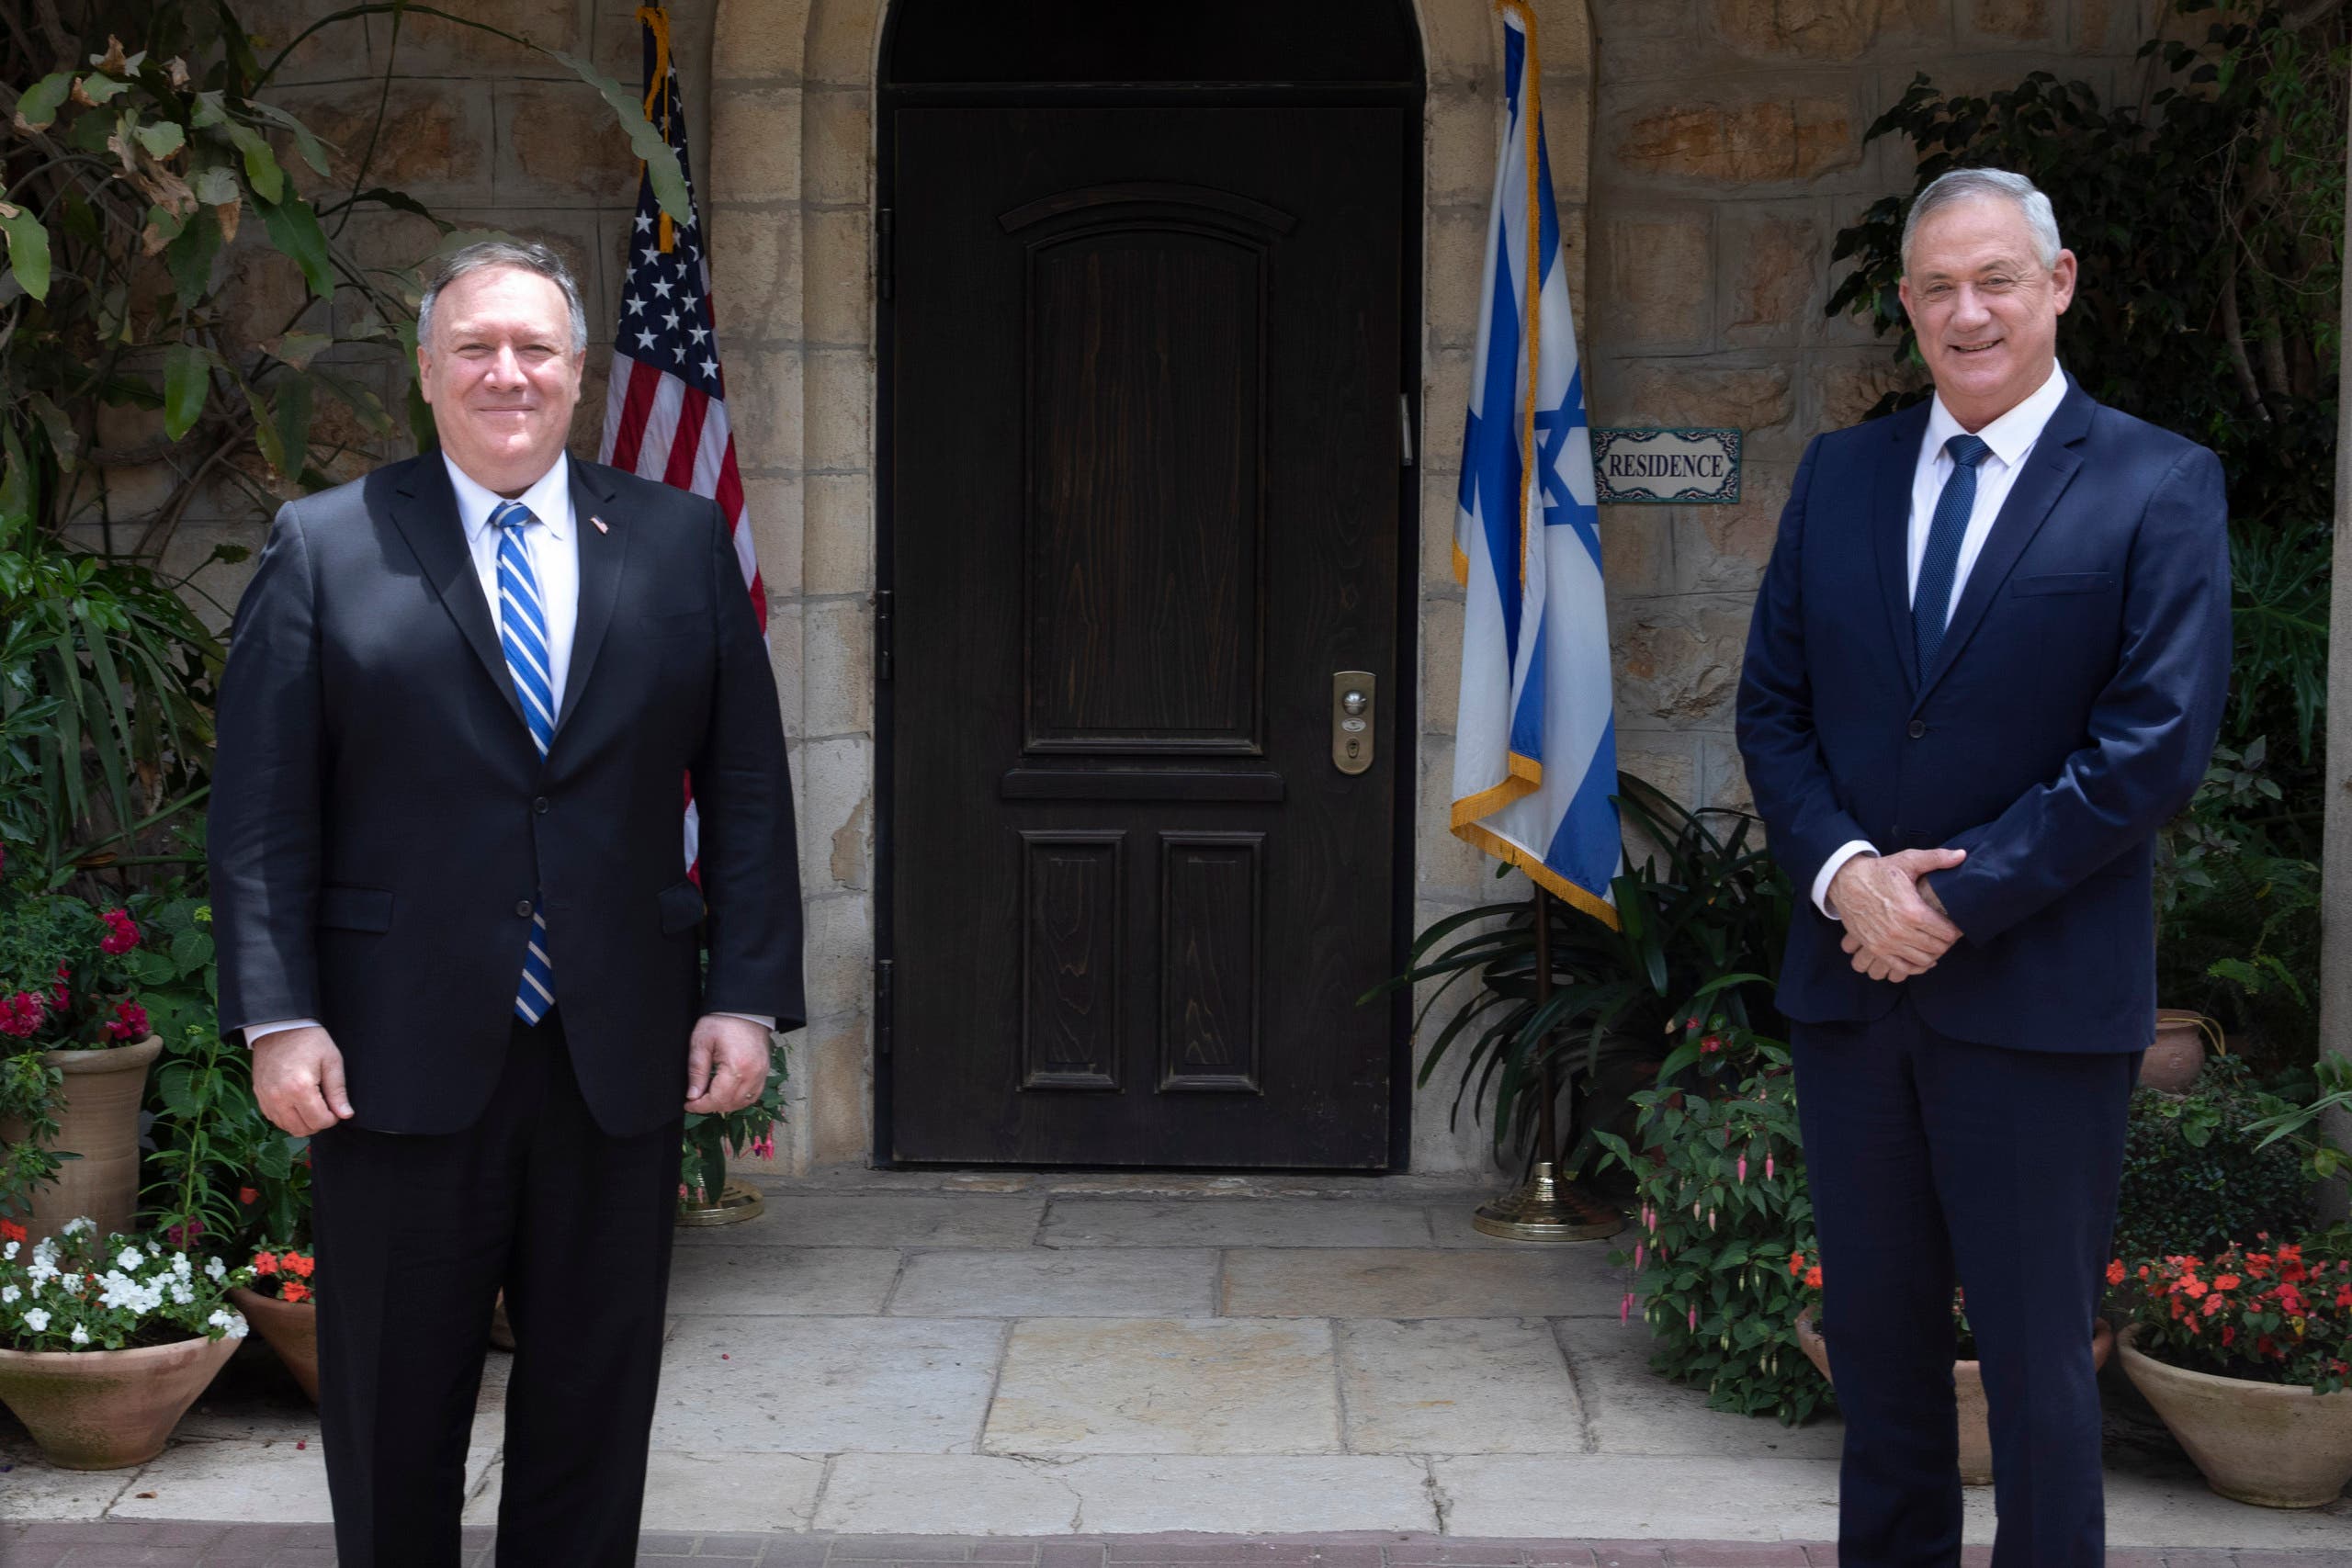 U.S. Secretary of State Mike Pompeo, left, meets Israeli Blue and White party leader Benny Gantz in Jerusalem, Wednesday, May 13, 2020. (AP)